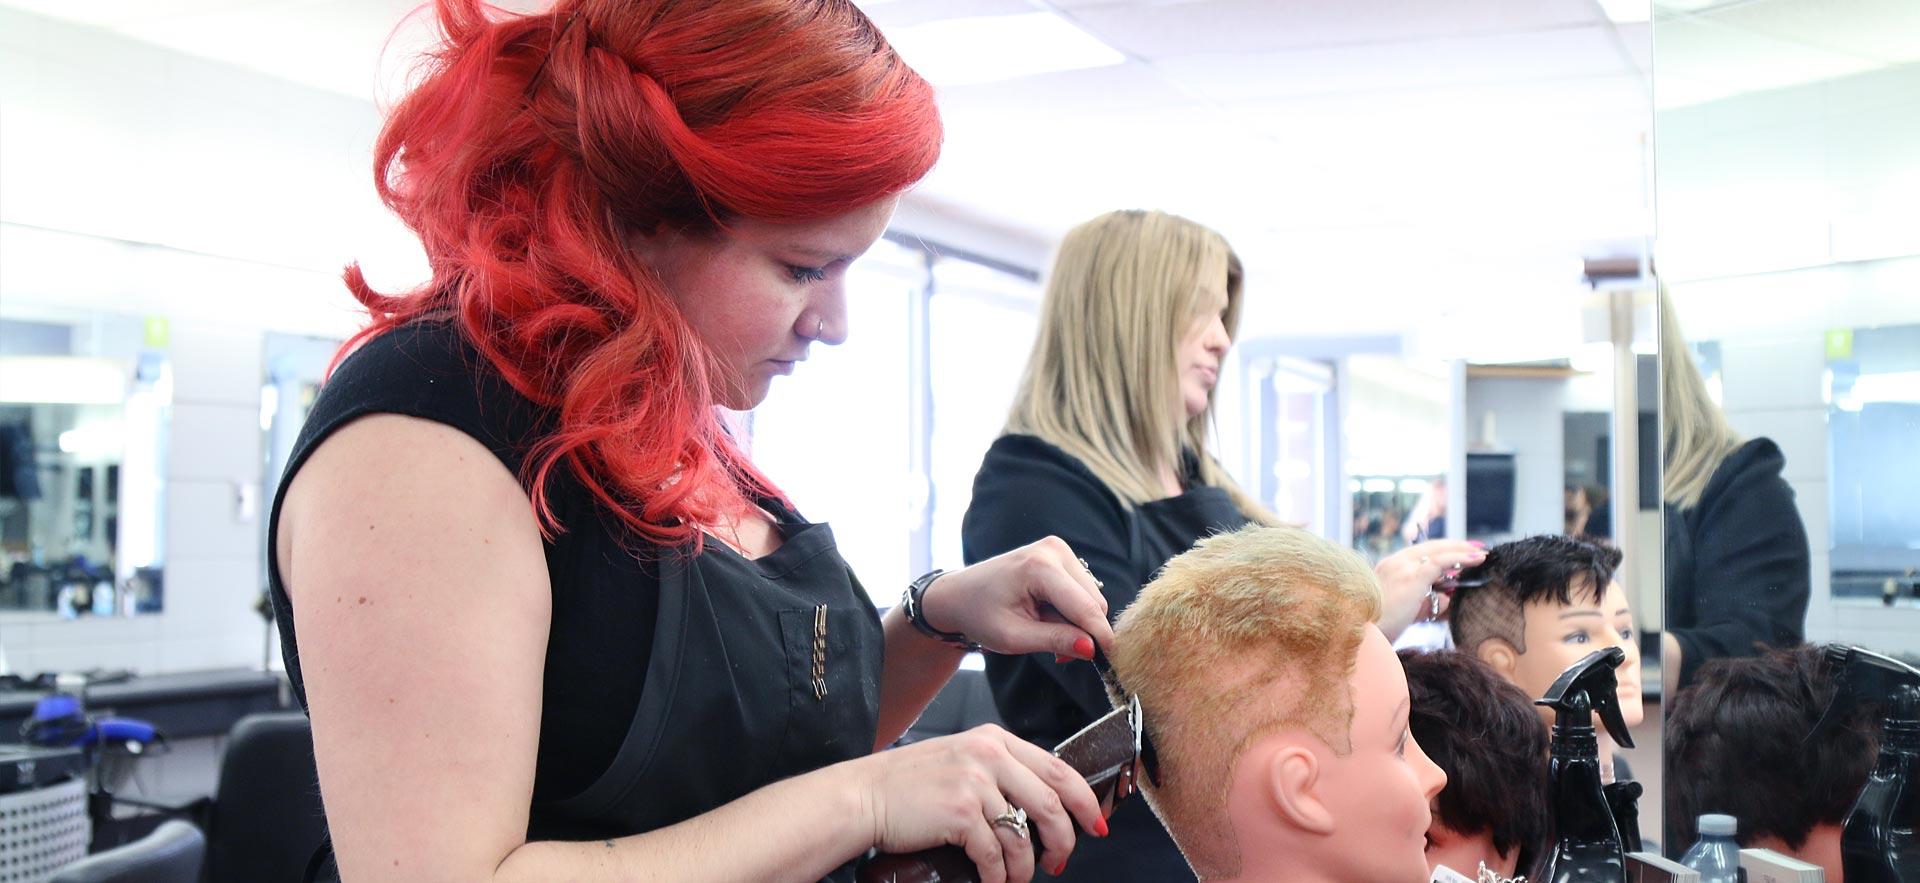 Female hairstylist student practices on a mannequin.